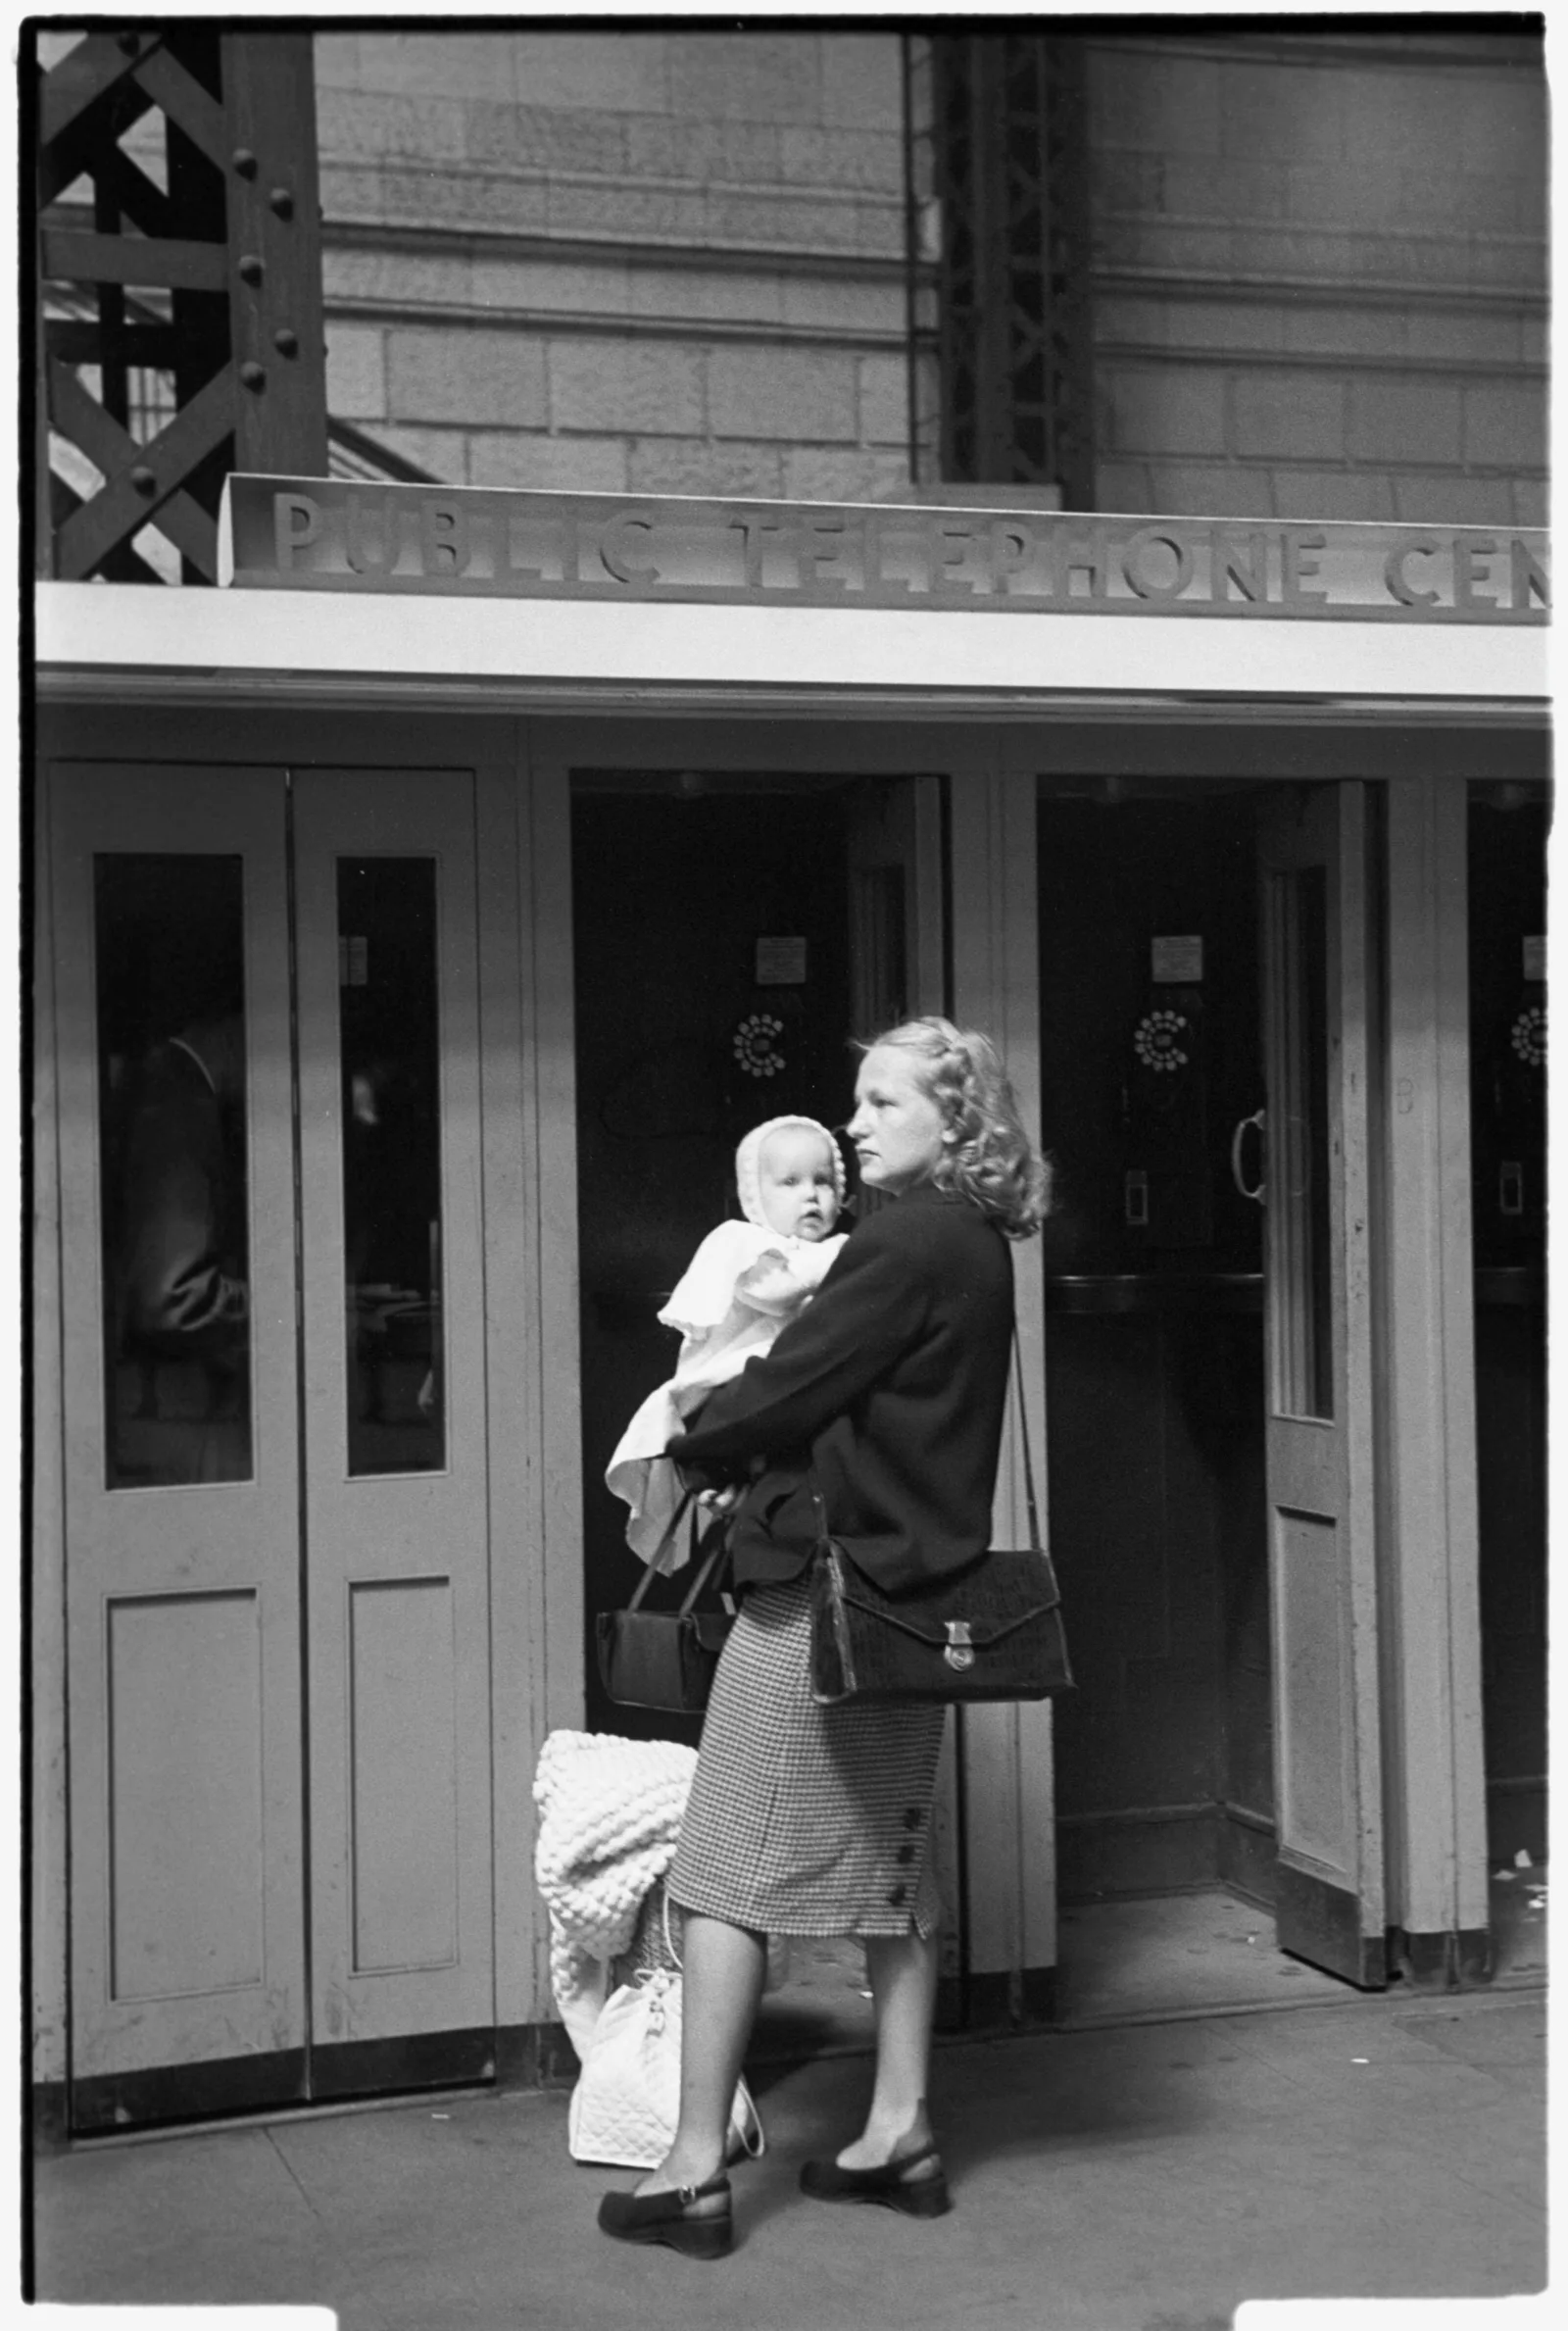 A mother holding her infant child in front of a row of train station telephone booths